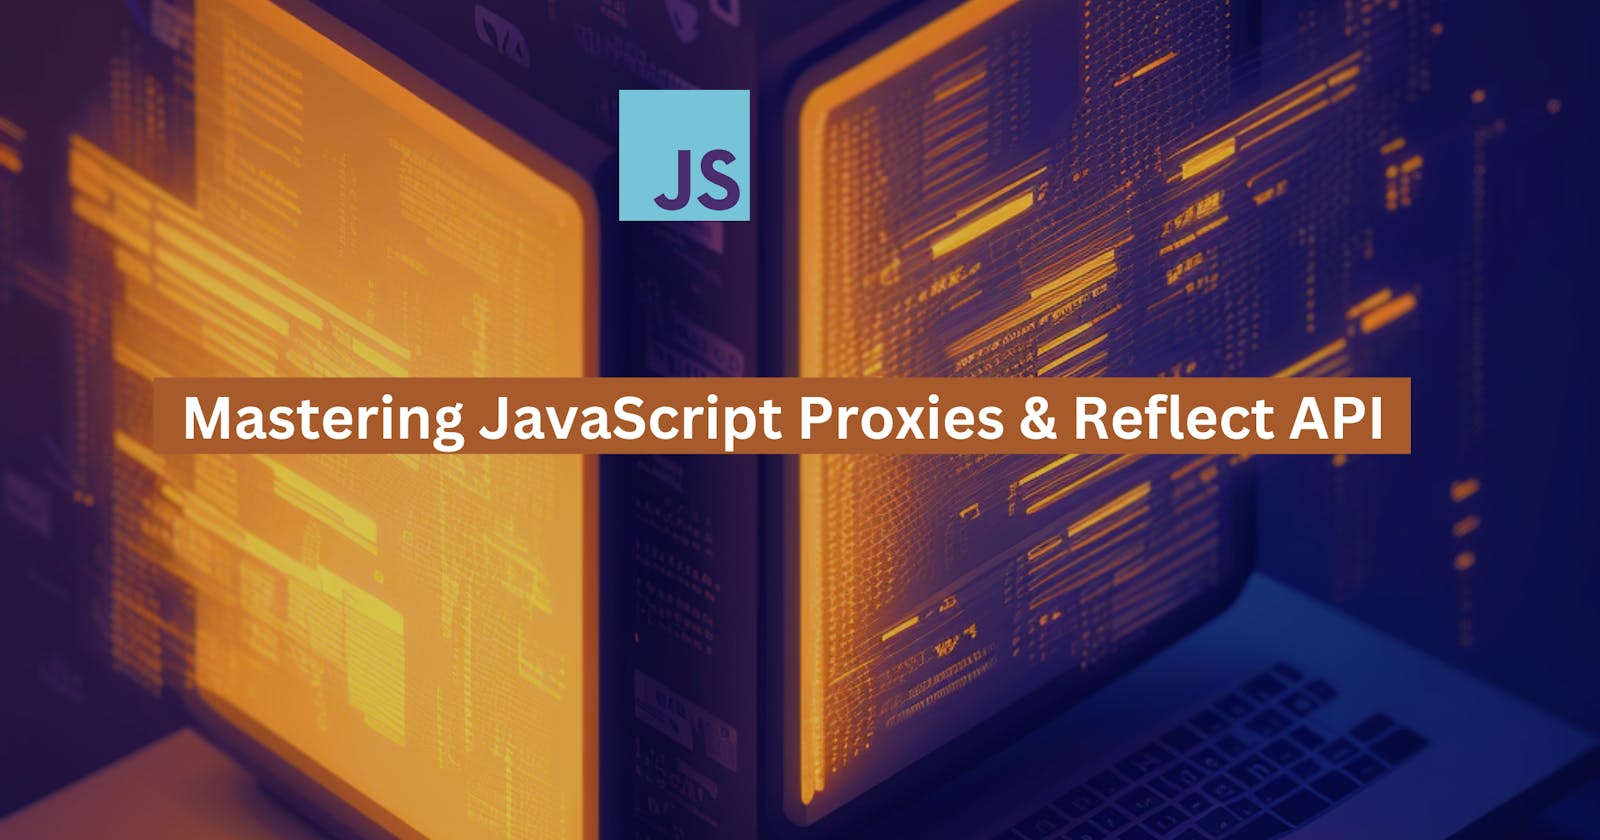 Real-World Applications of JavaScript Proxies